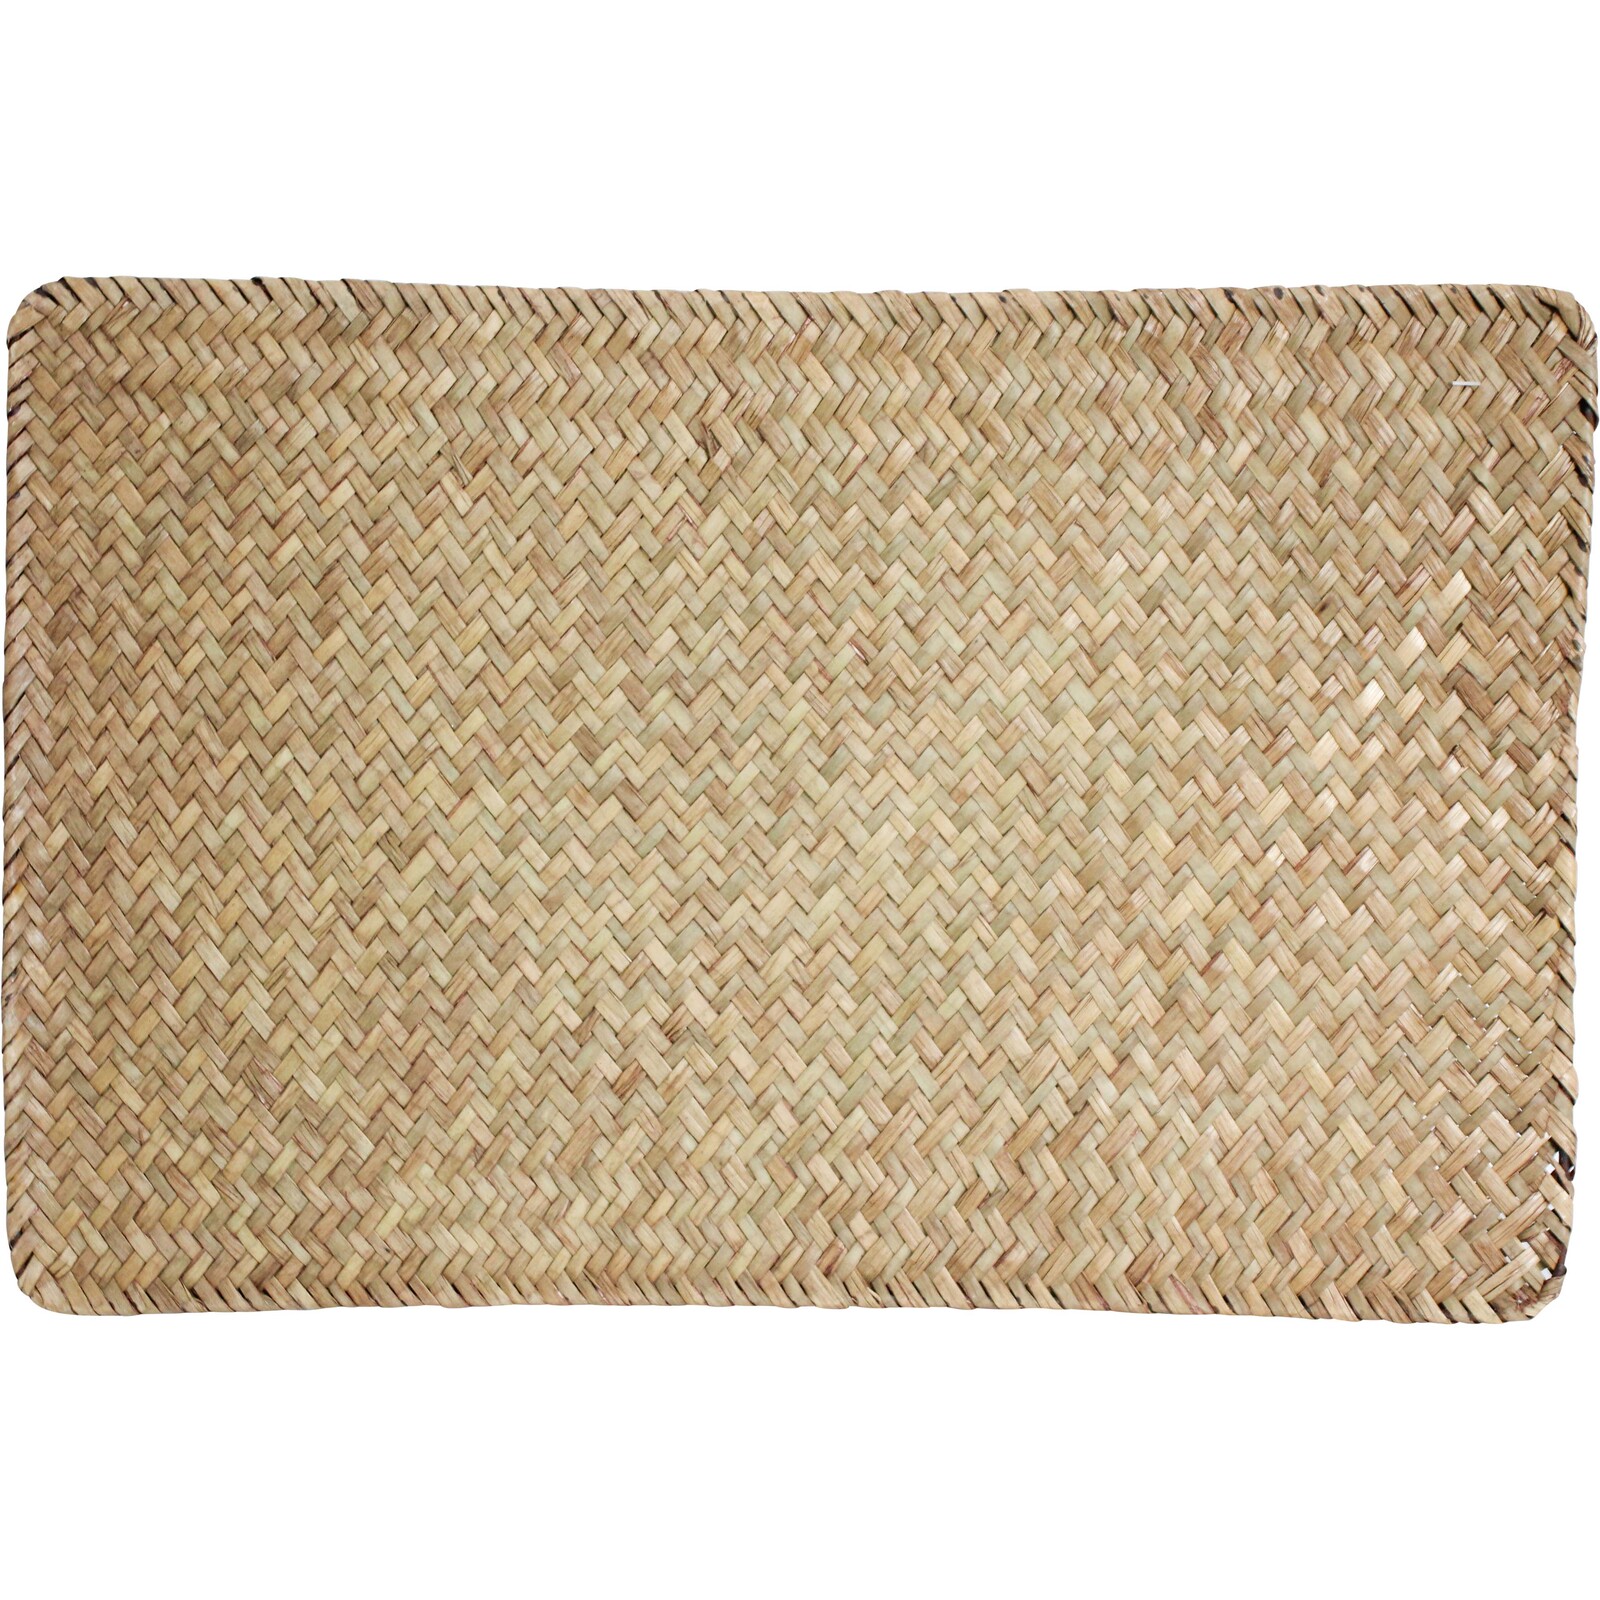 Placemat Long Weave Natural